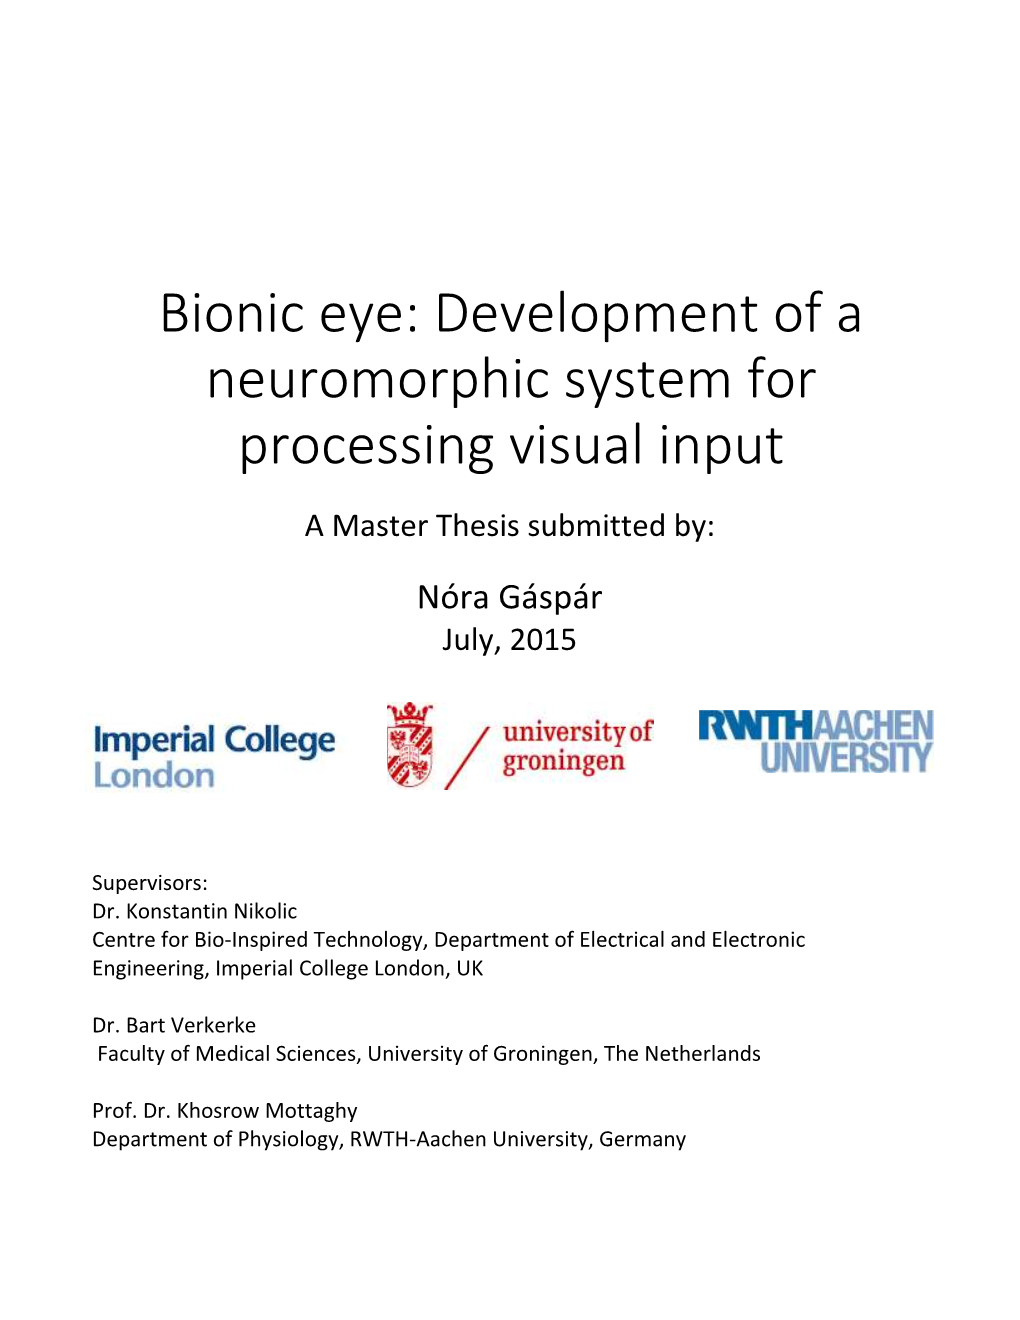 Bionic Eye: Development of a Neuromorphic System for Processing Visual Input a Master Thesis Submitted By